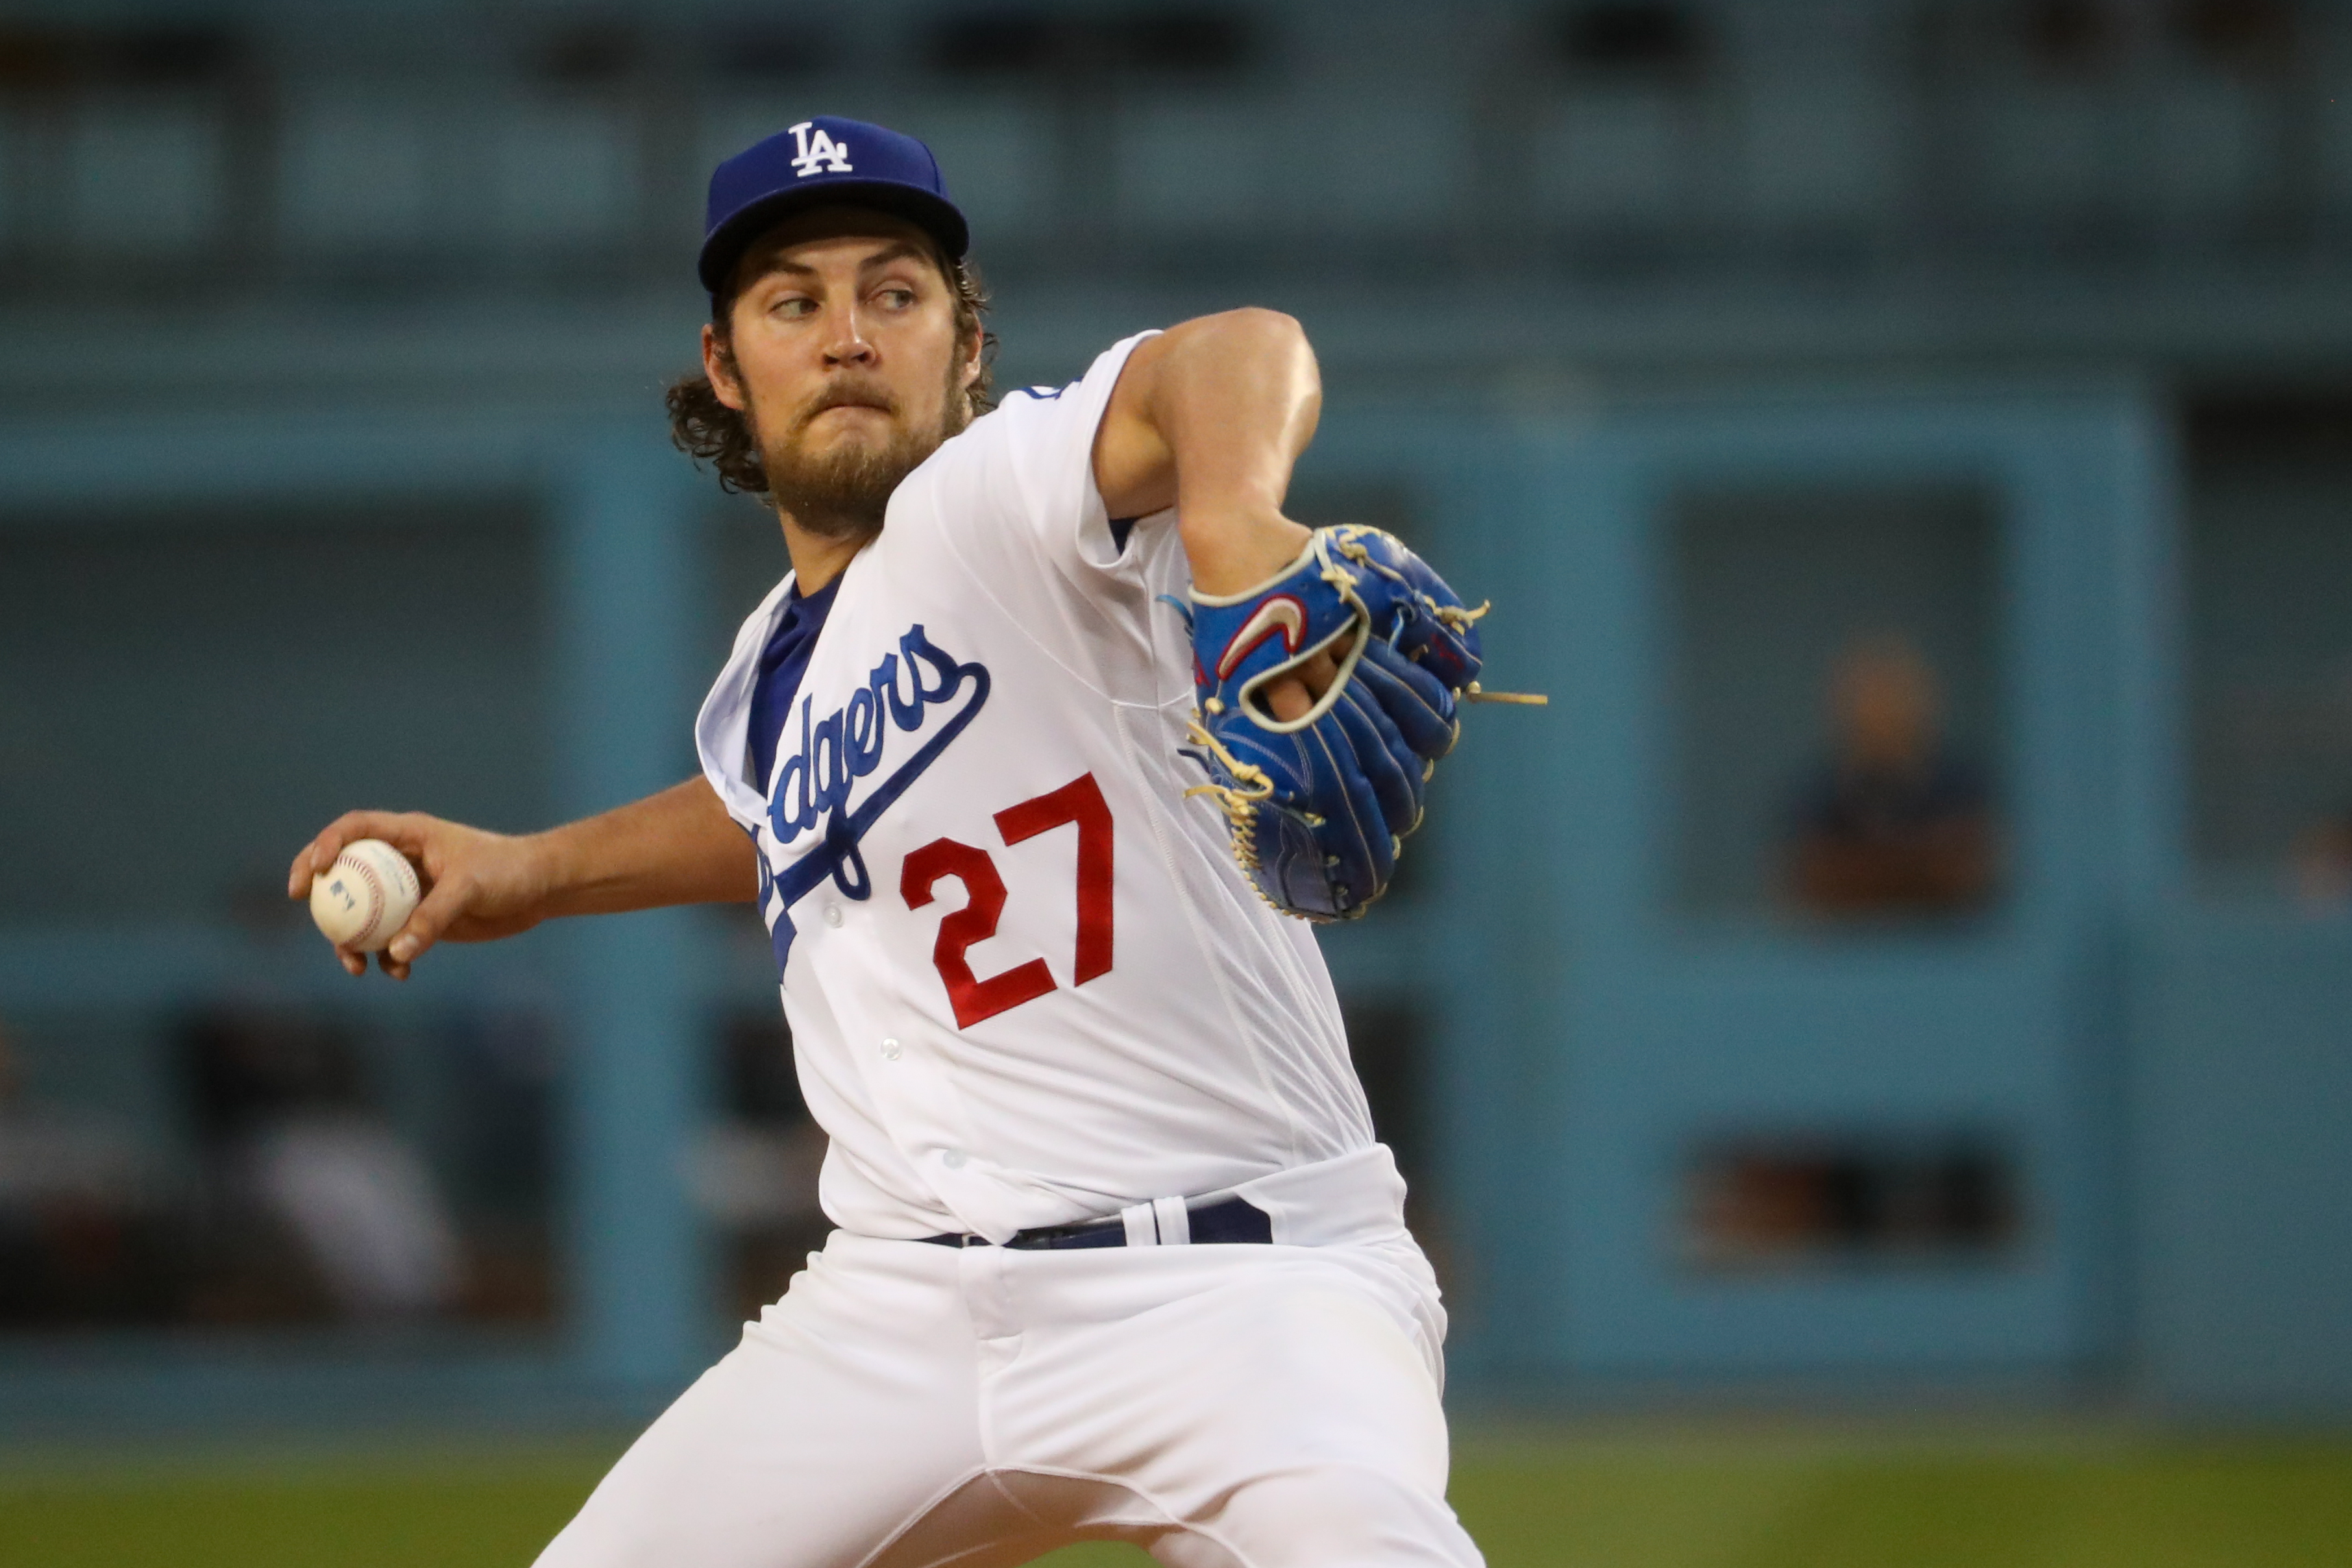 Dodgers pitcher Trevor Bauer's leave extended through March 19 by